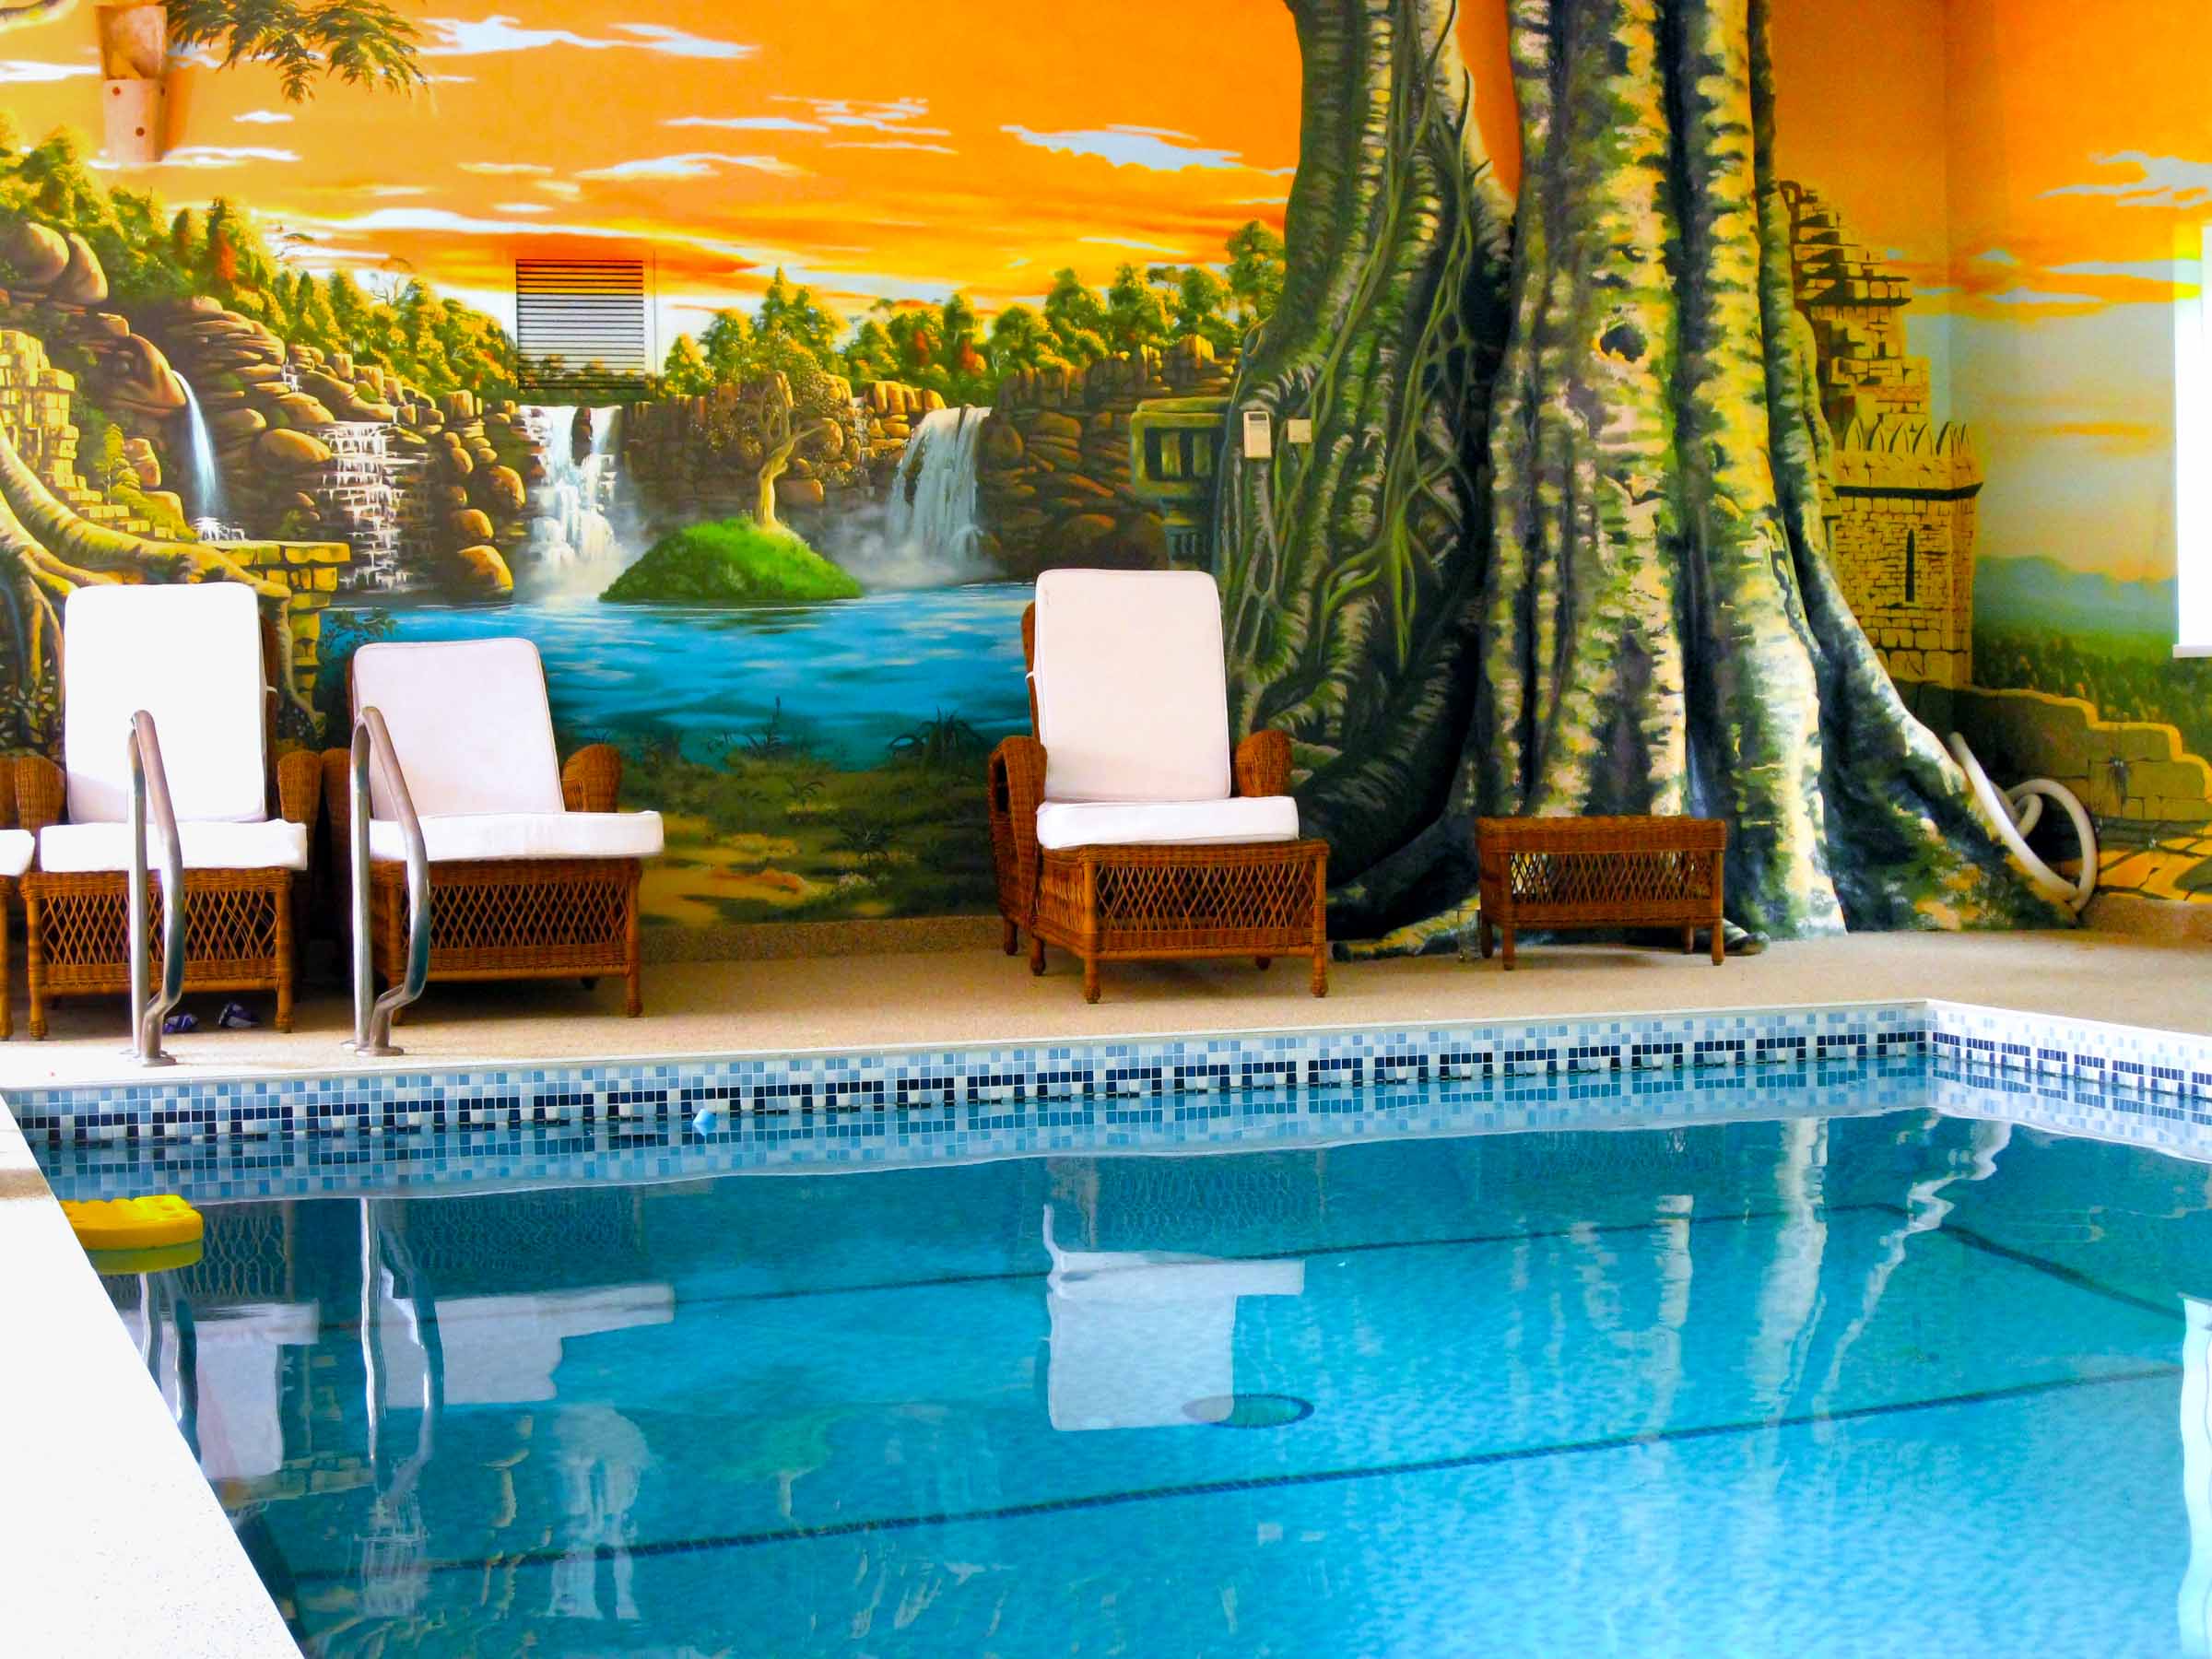 Pool Loungers around oasis mural